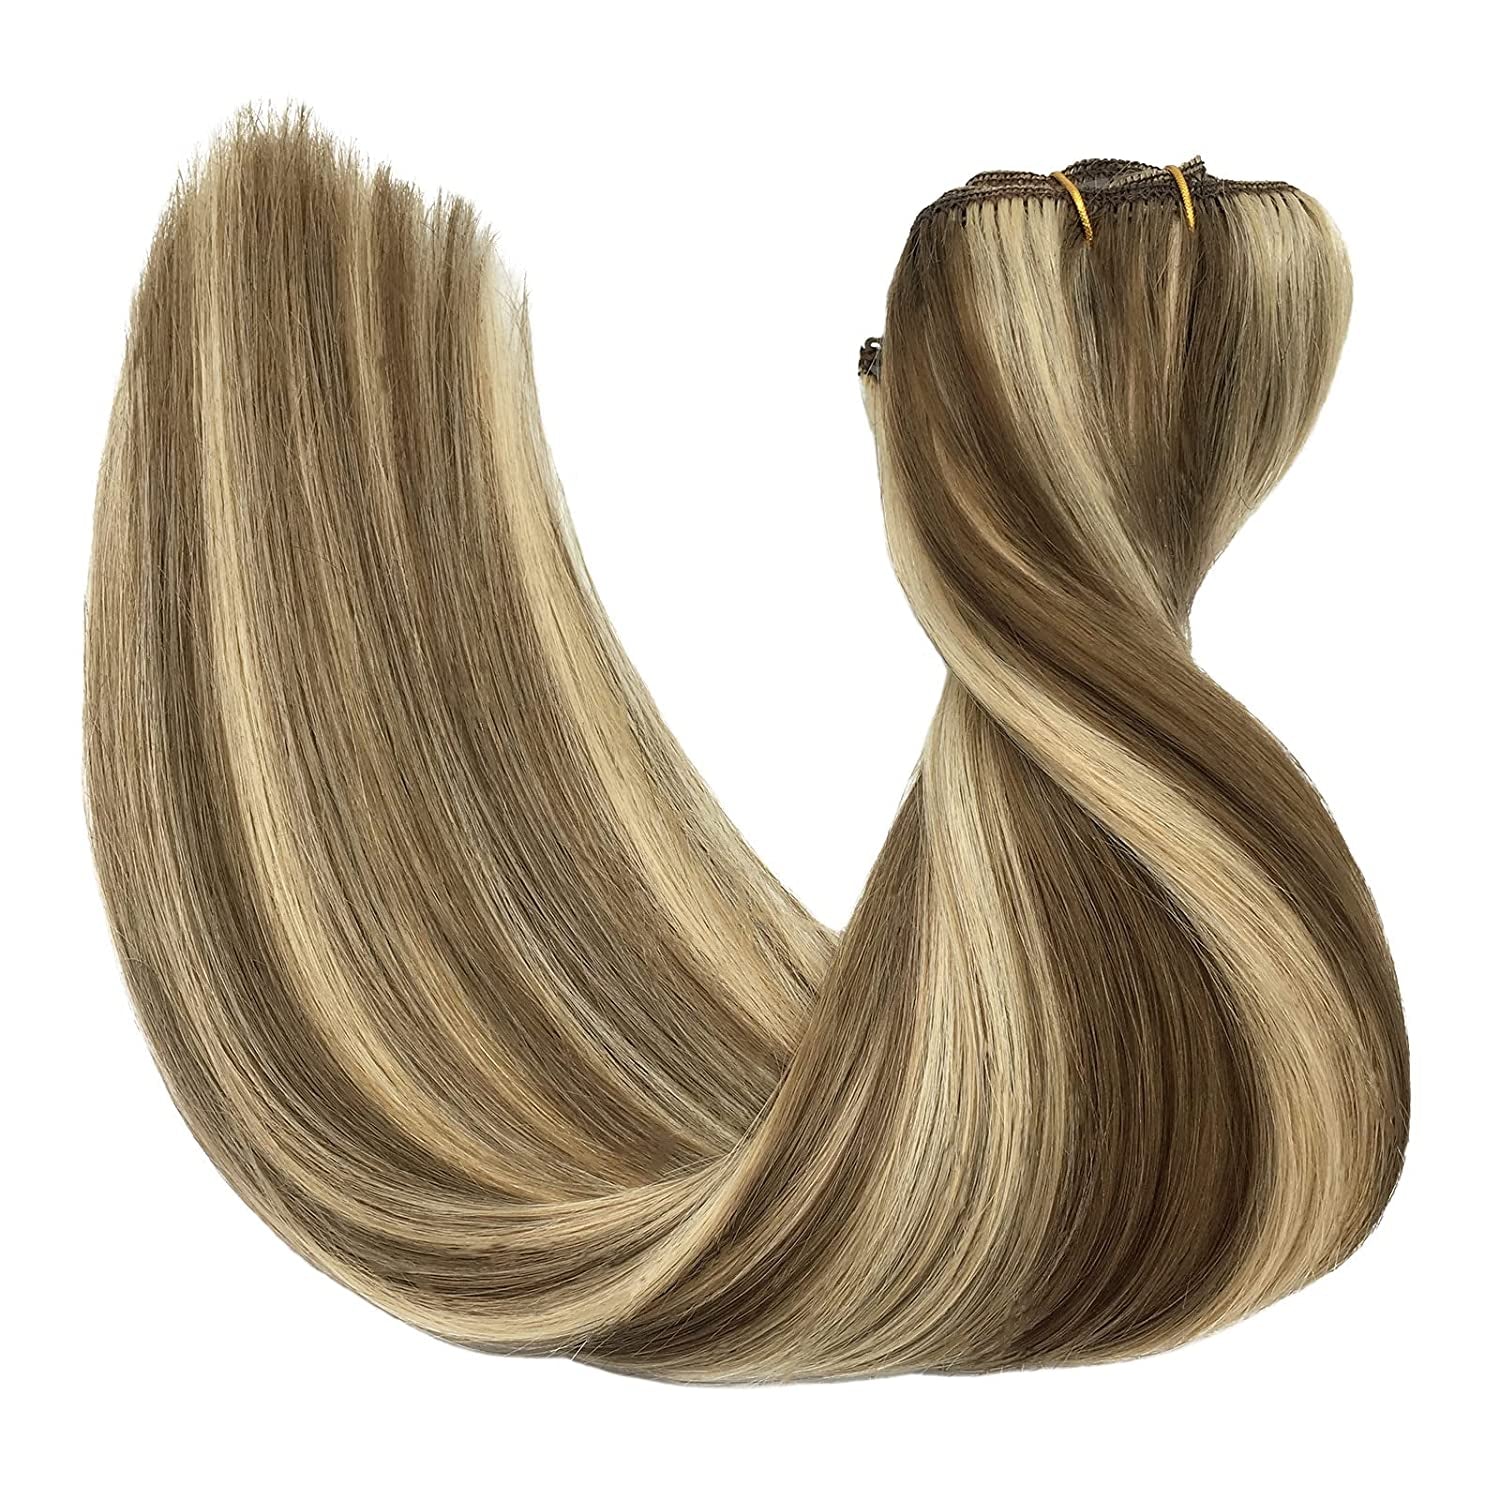 Hair Extensions 120G 20 Inch Medium Brown Highlighted Golden Blonde in Extensions Real Human Hair Natural Hair Clip in Straight Hair Extensions